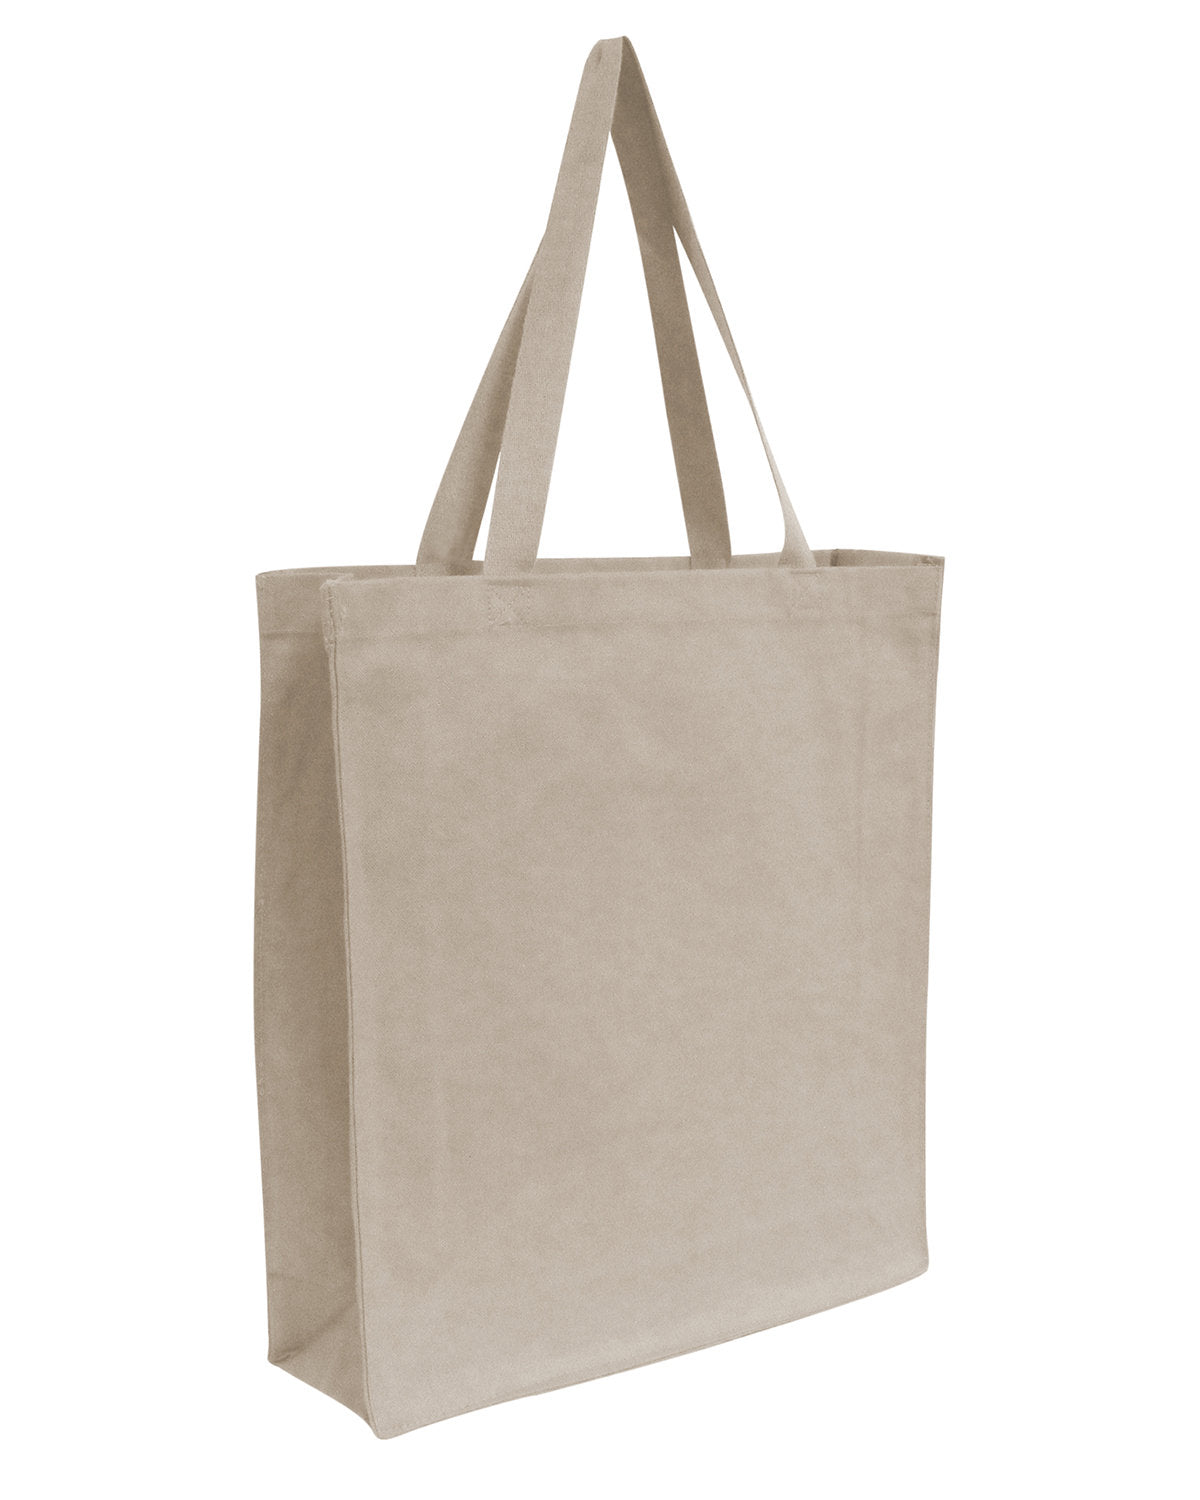 OAD100-OAD-NATURAL-OAD-Bags and Accessories-1